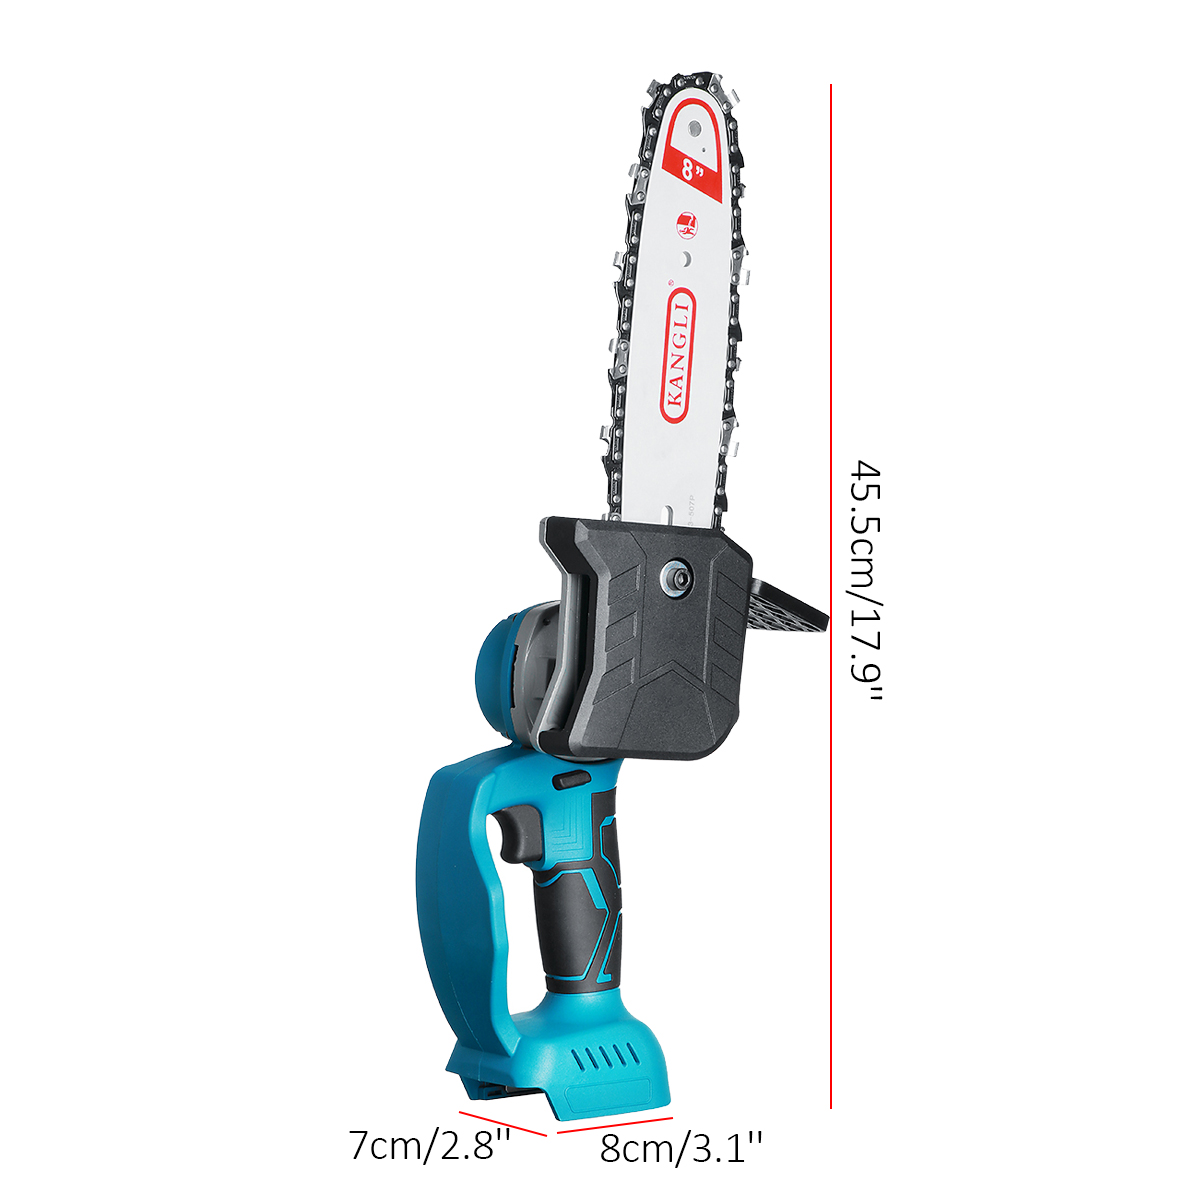 8-Inch-Electric-Chain-Saw-Cordless-Woodworking-Chainsaw-Power-Tool-Fit-For-Makita-18V21V-Battery-1804676-12